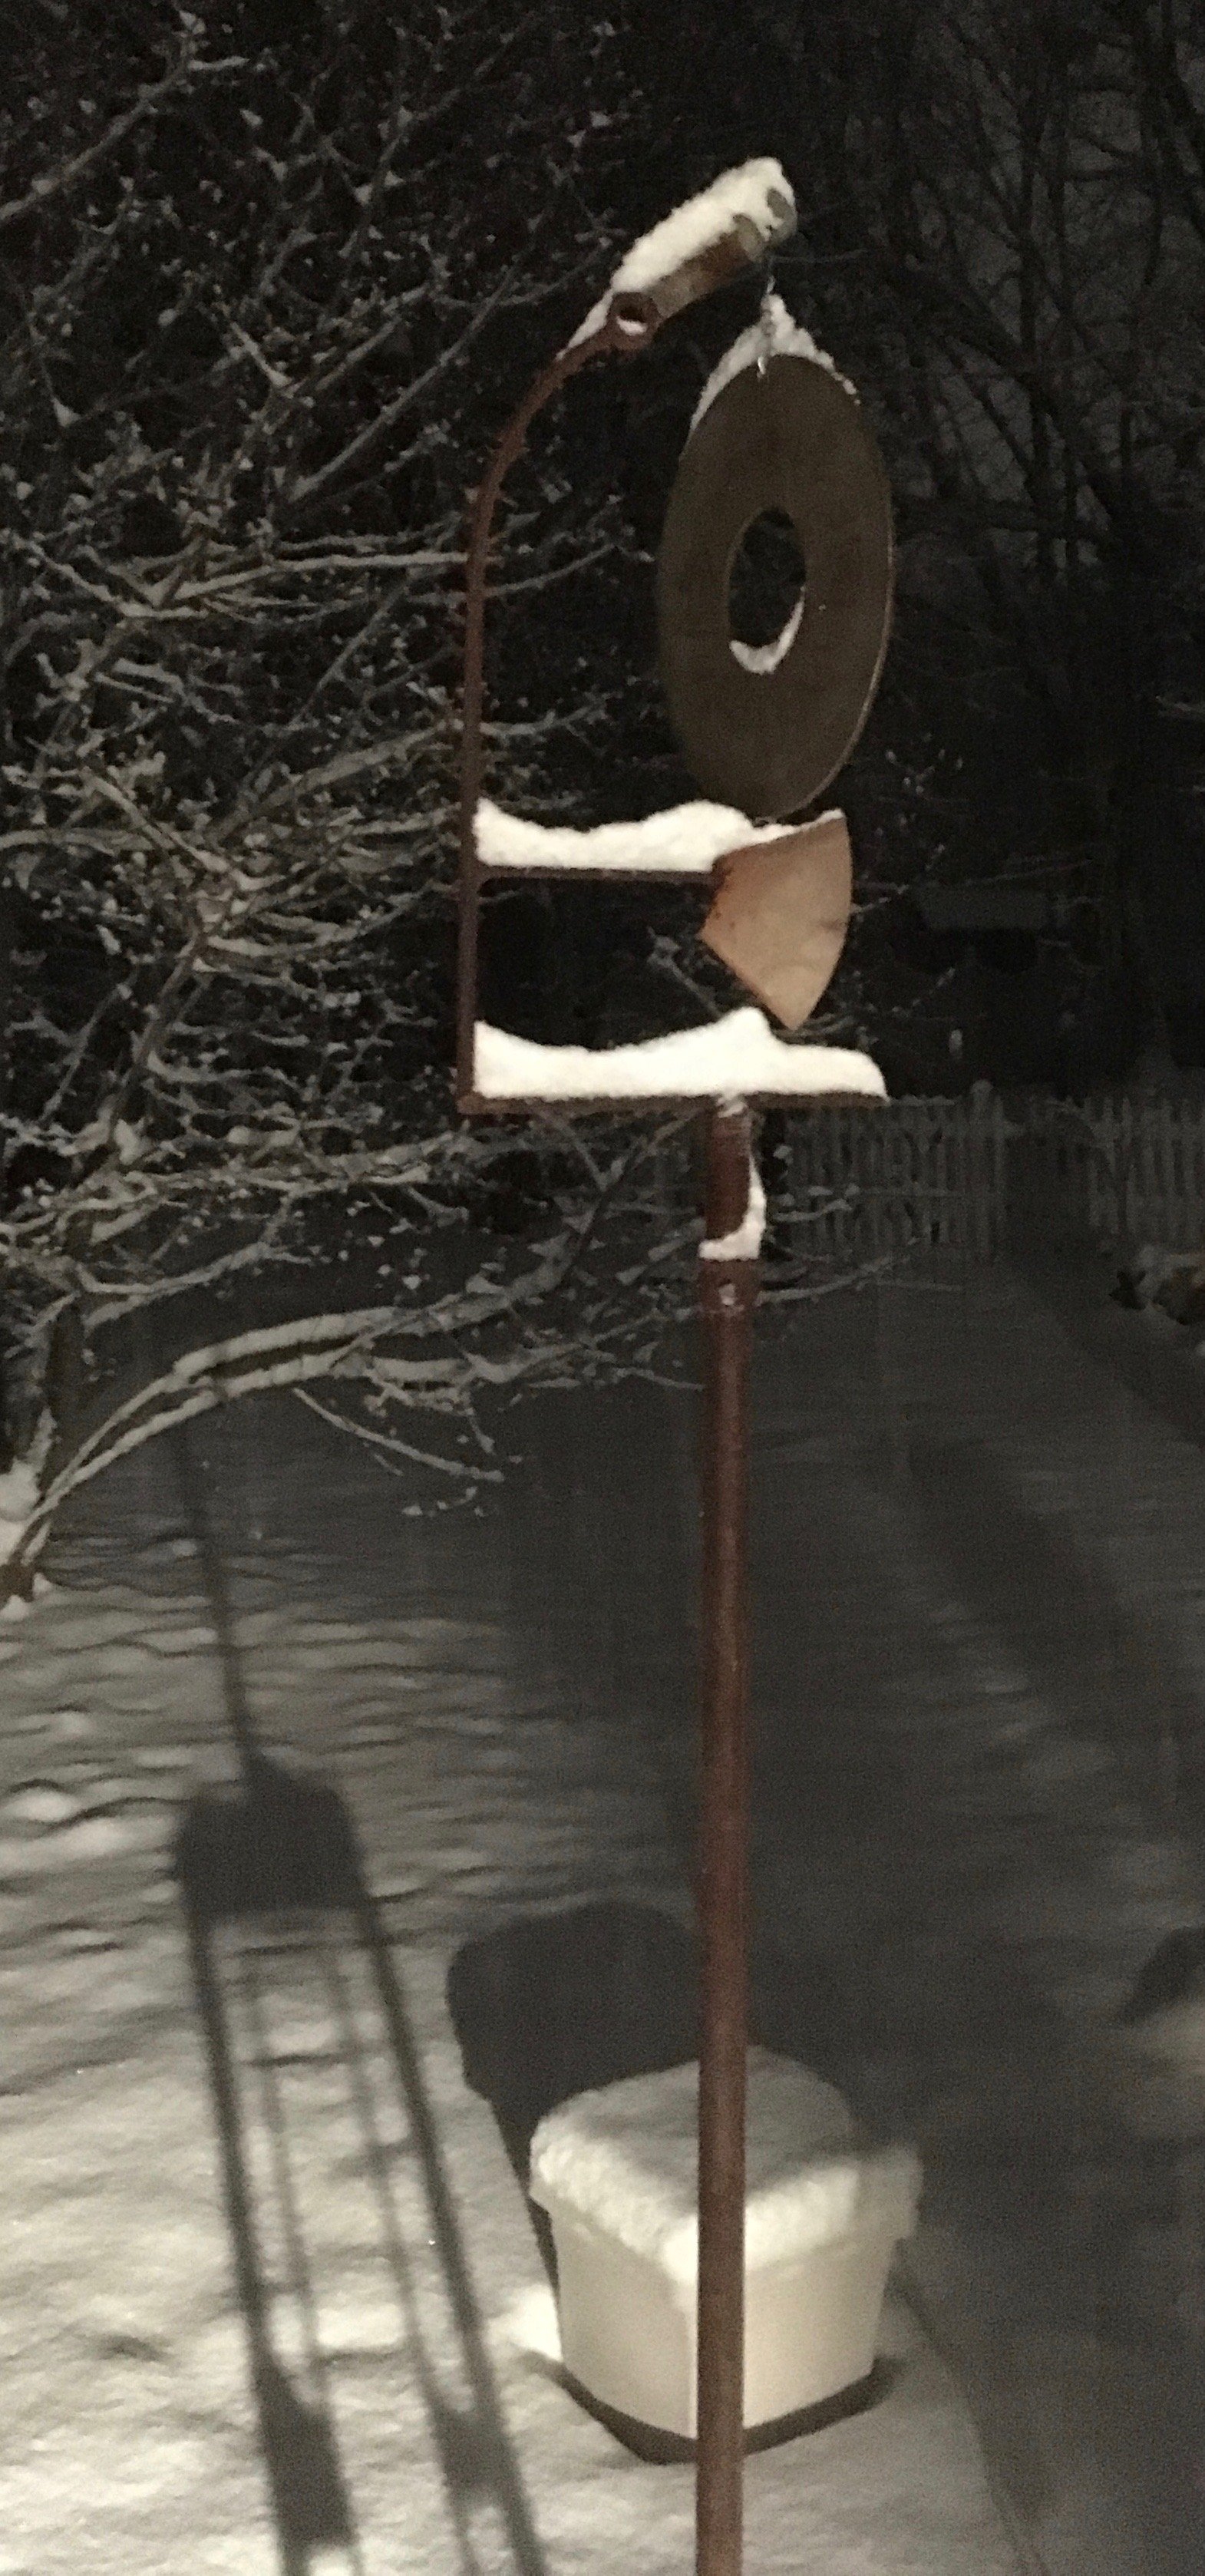 Gong in snow detail